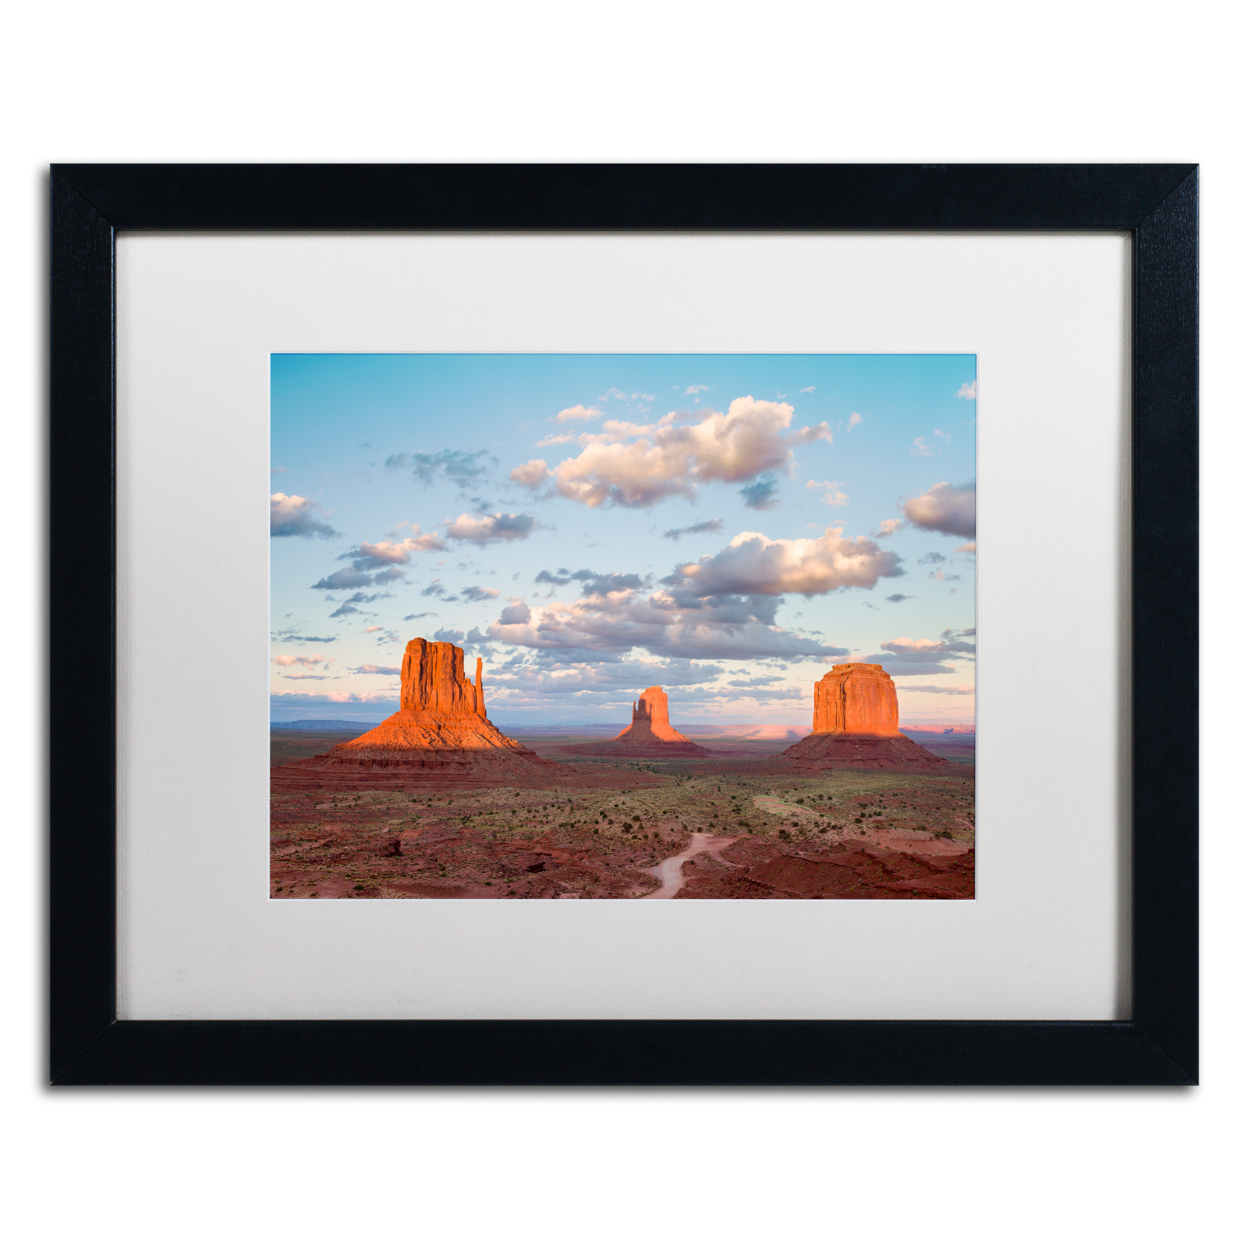 Michael Blanchette Photography 'Scarlet Monuments' Black Wooden Framed Art 18 X 22 Inches